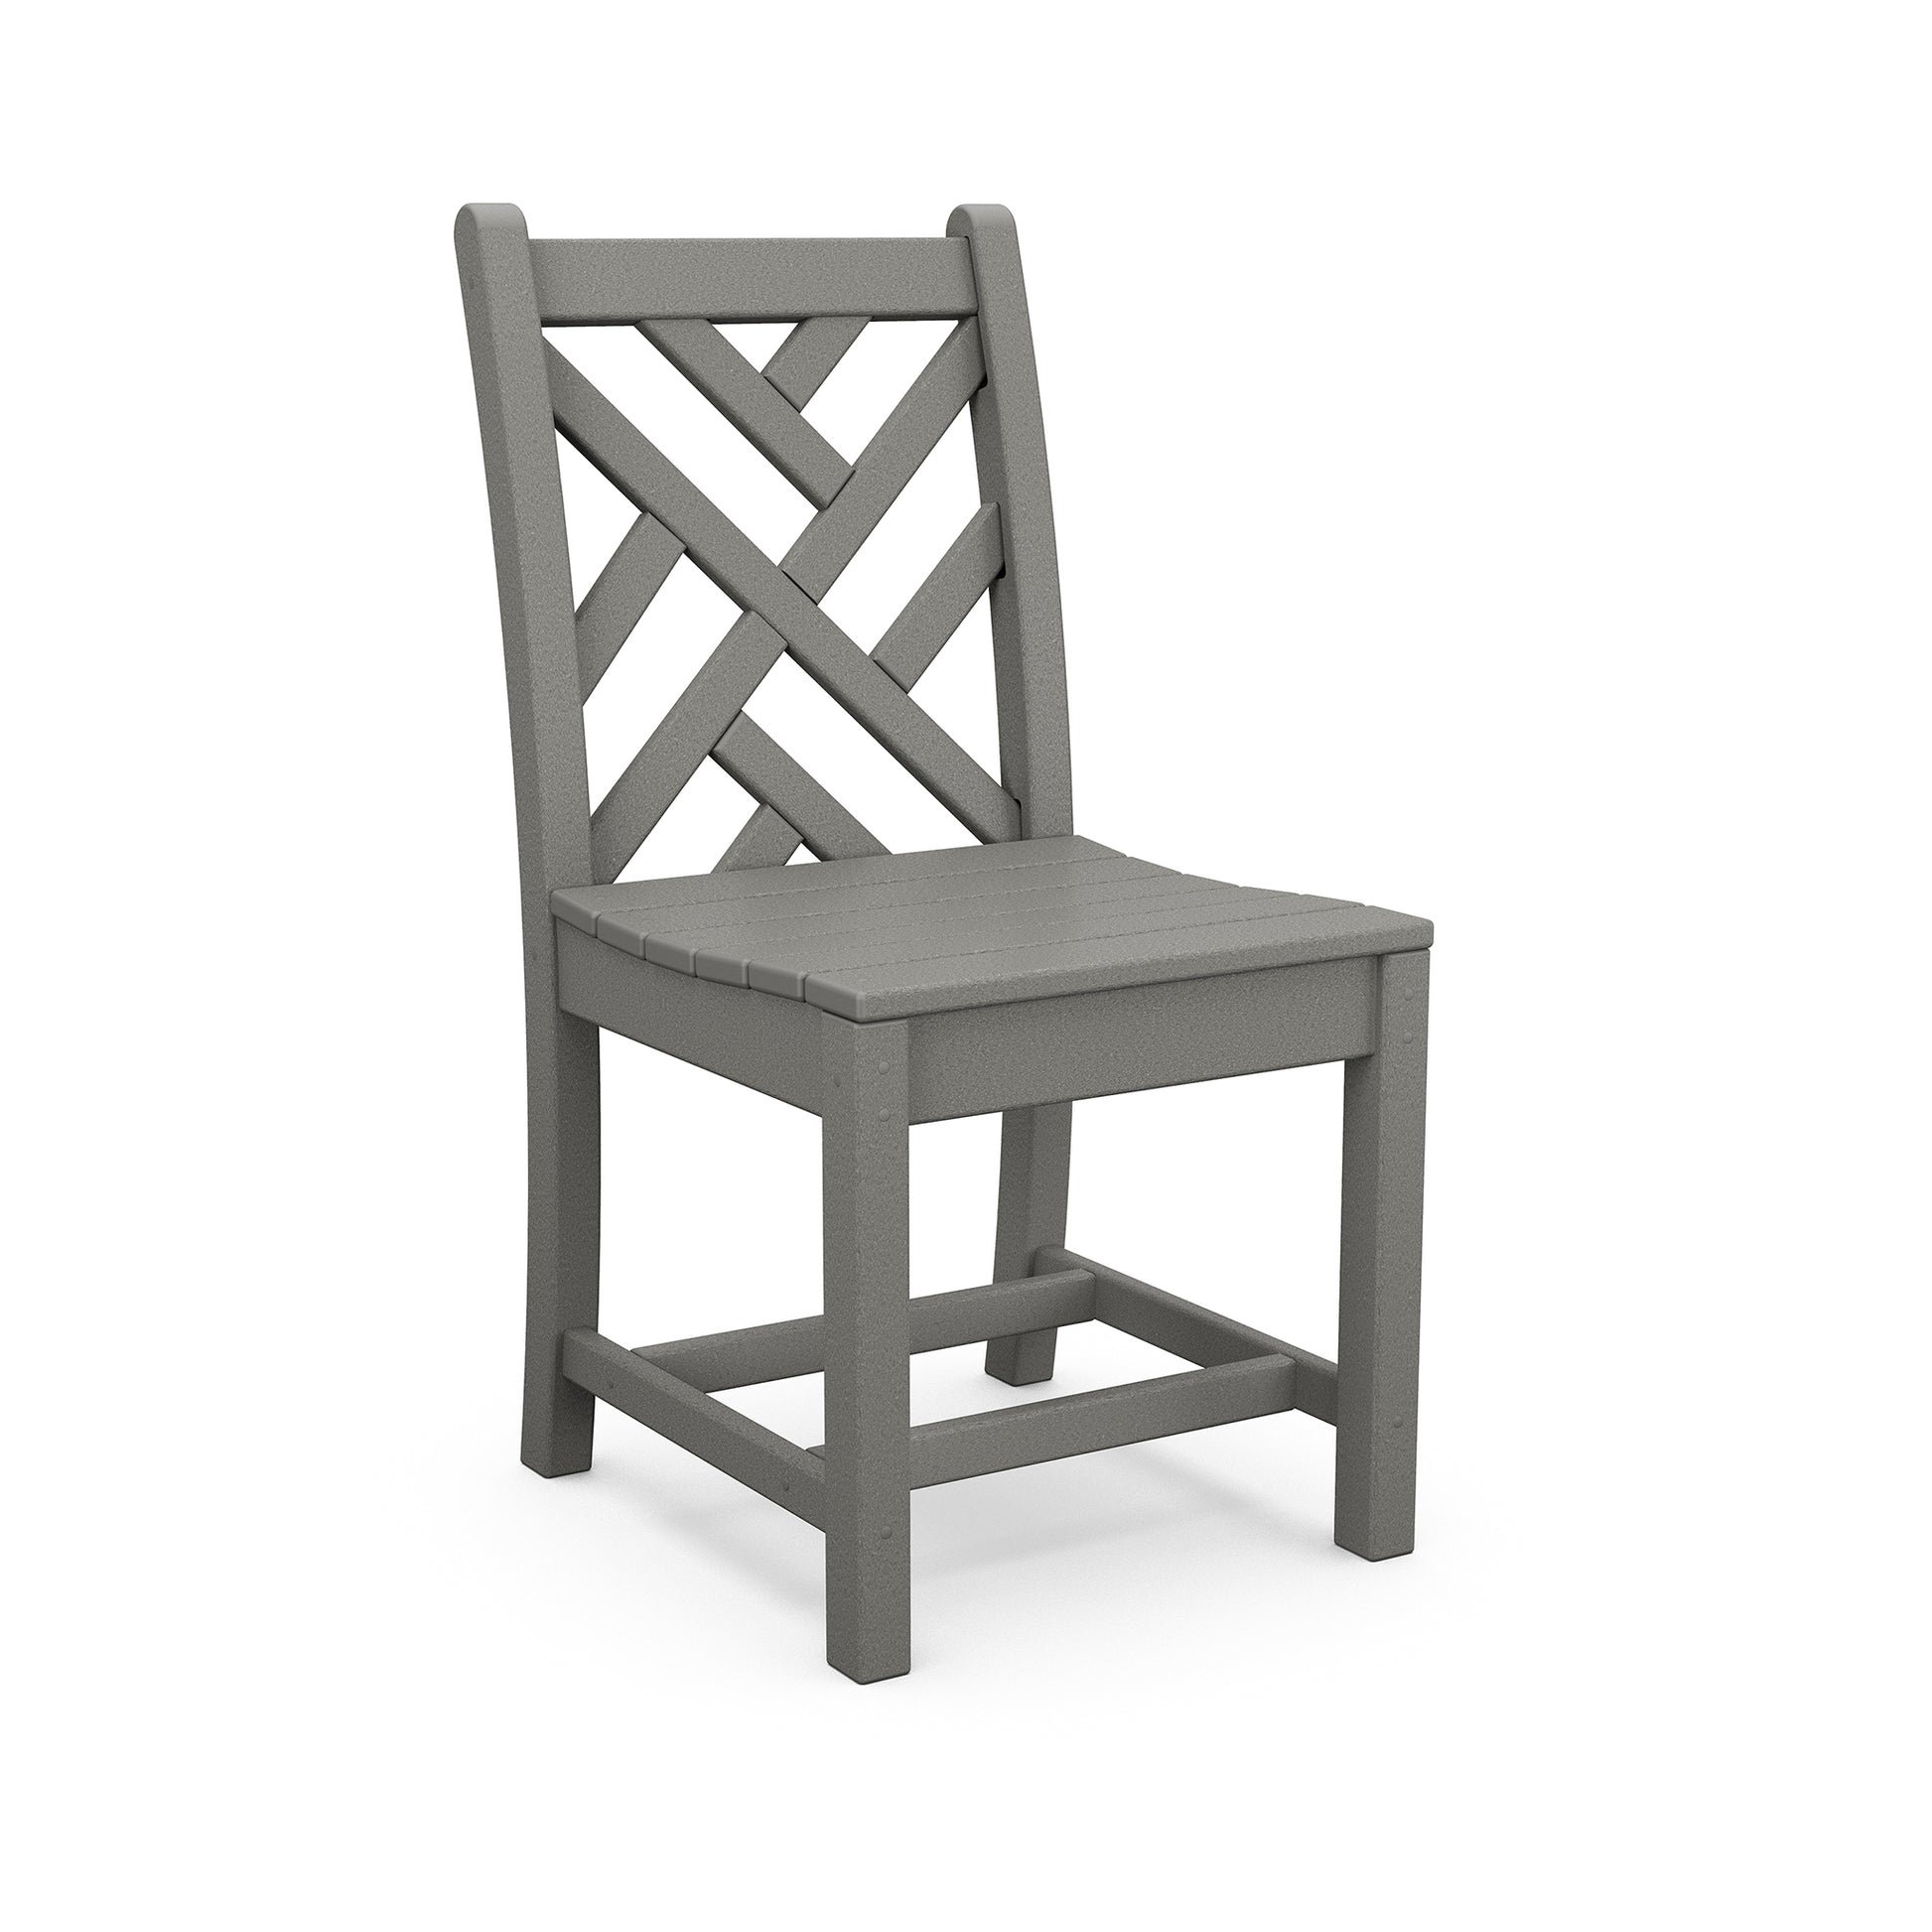 A 3D rendering of a POLYWOOD Chippendale Outdoor Dining Side Chair, featuring a gray recycled plastic frame with a criss-cross back design and square seat, positioned against a plain white background.